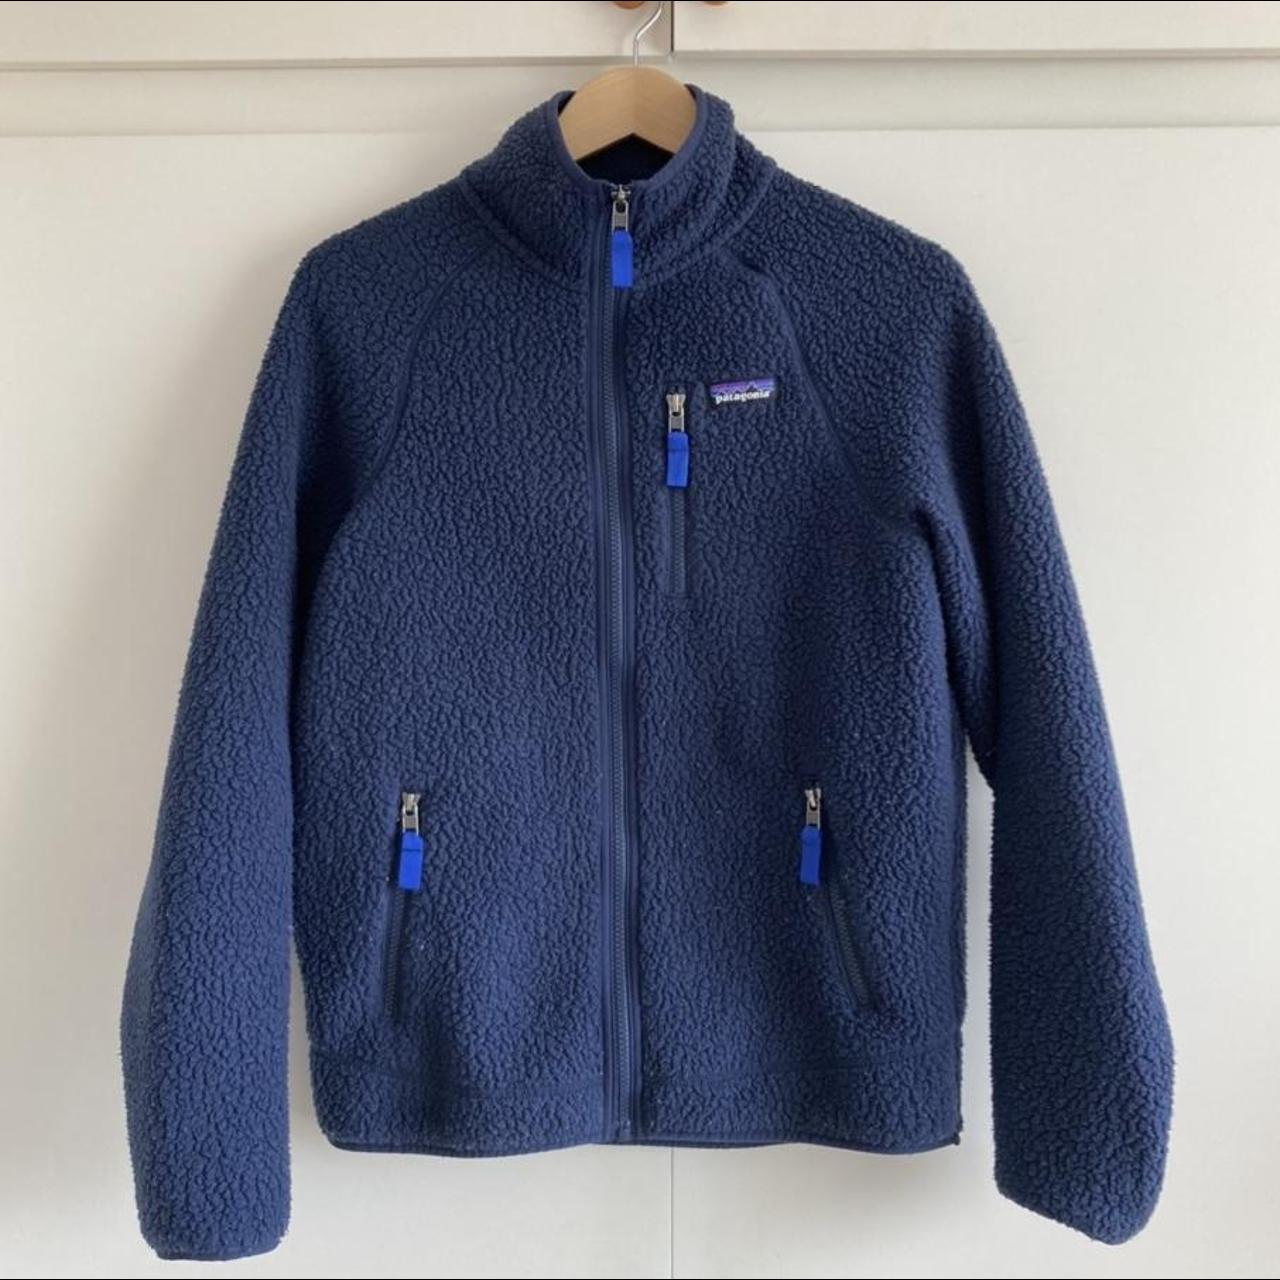 Patagonia retro pile fleece in navy, size small.... - Depop